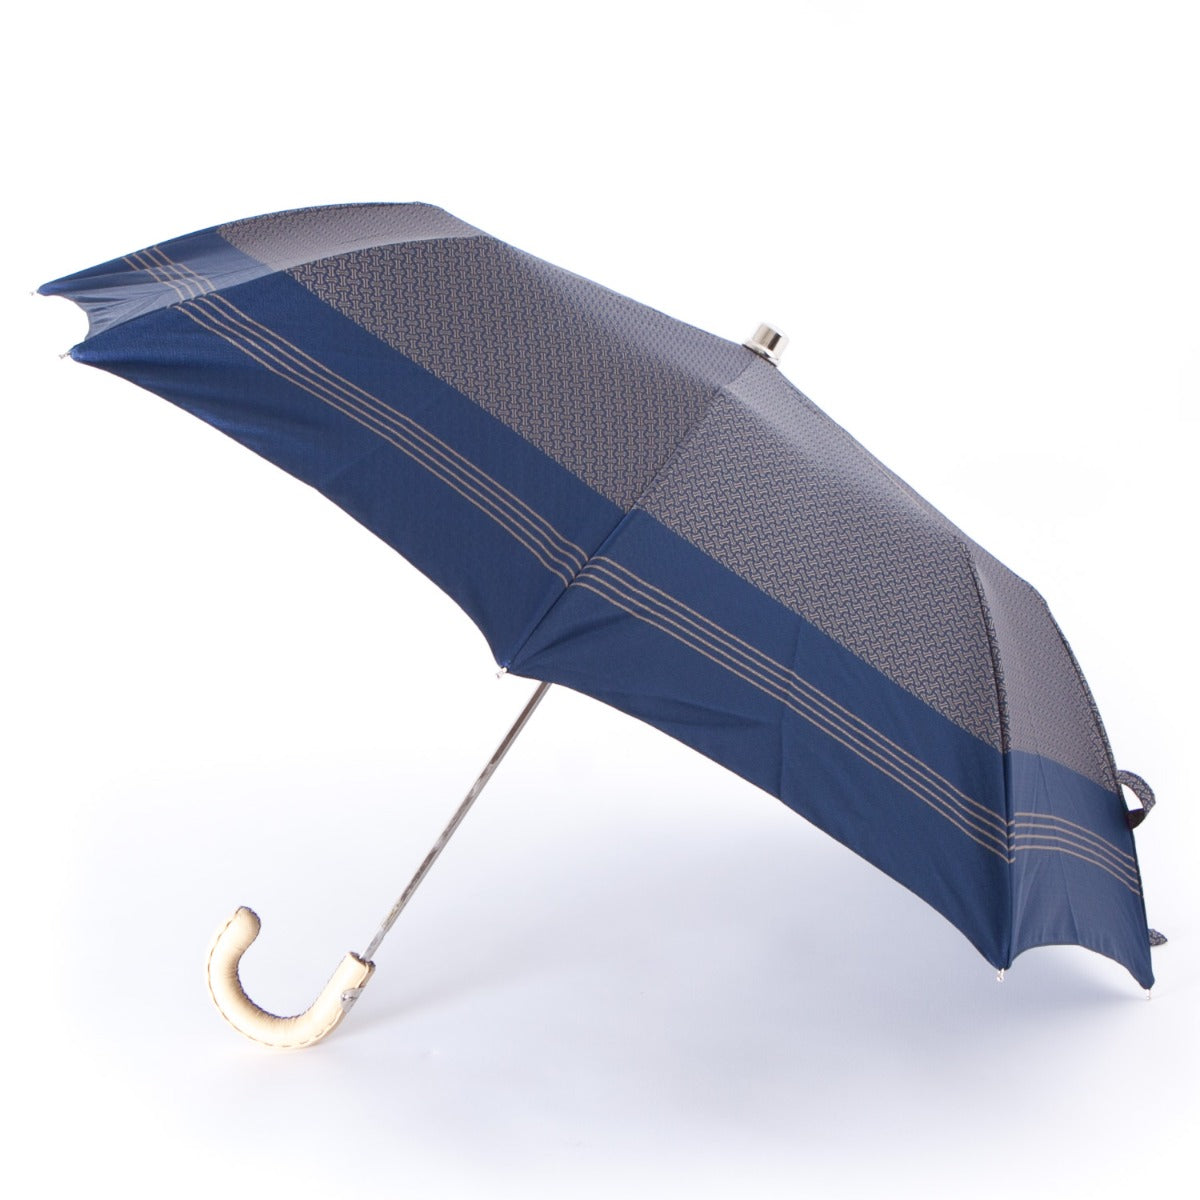 Patterned Navy Travel Umbrella with Leather Handle